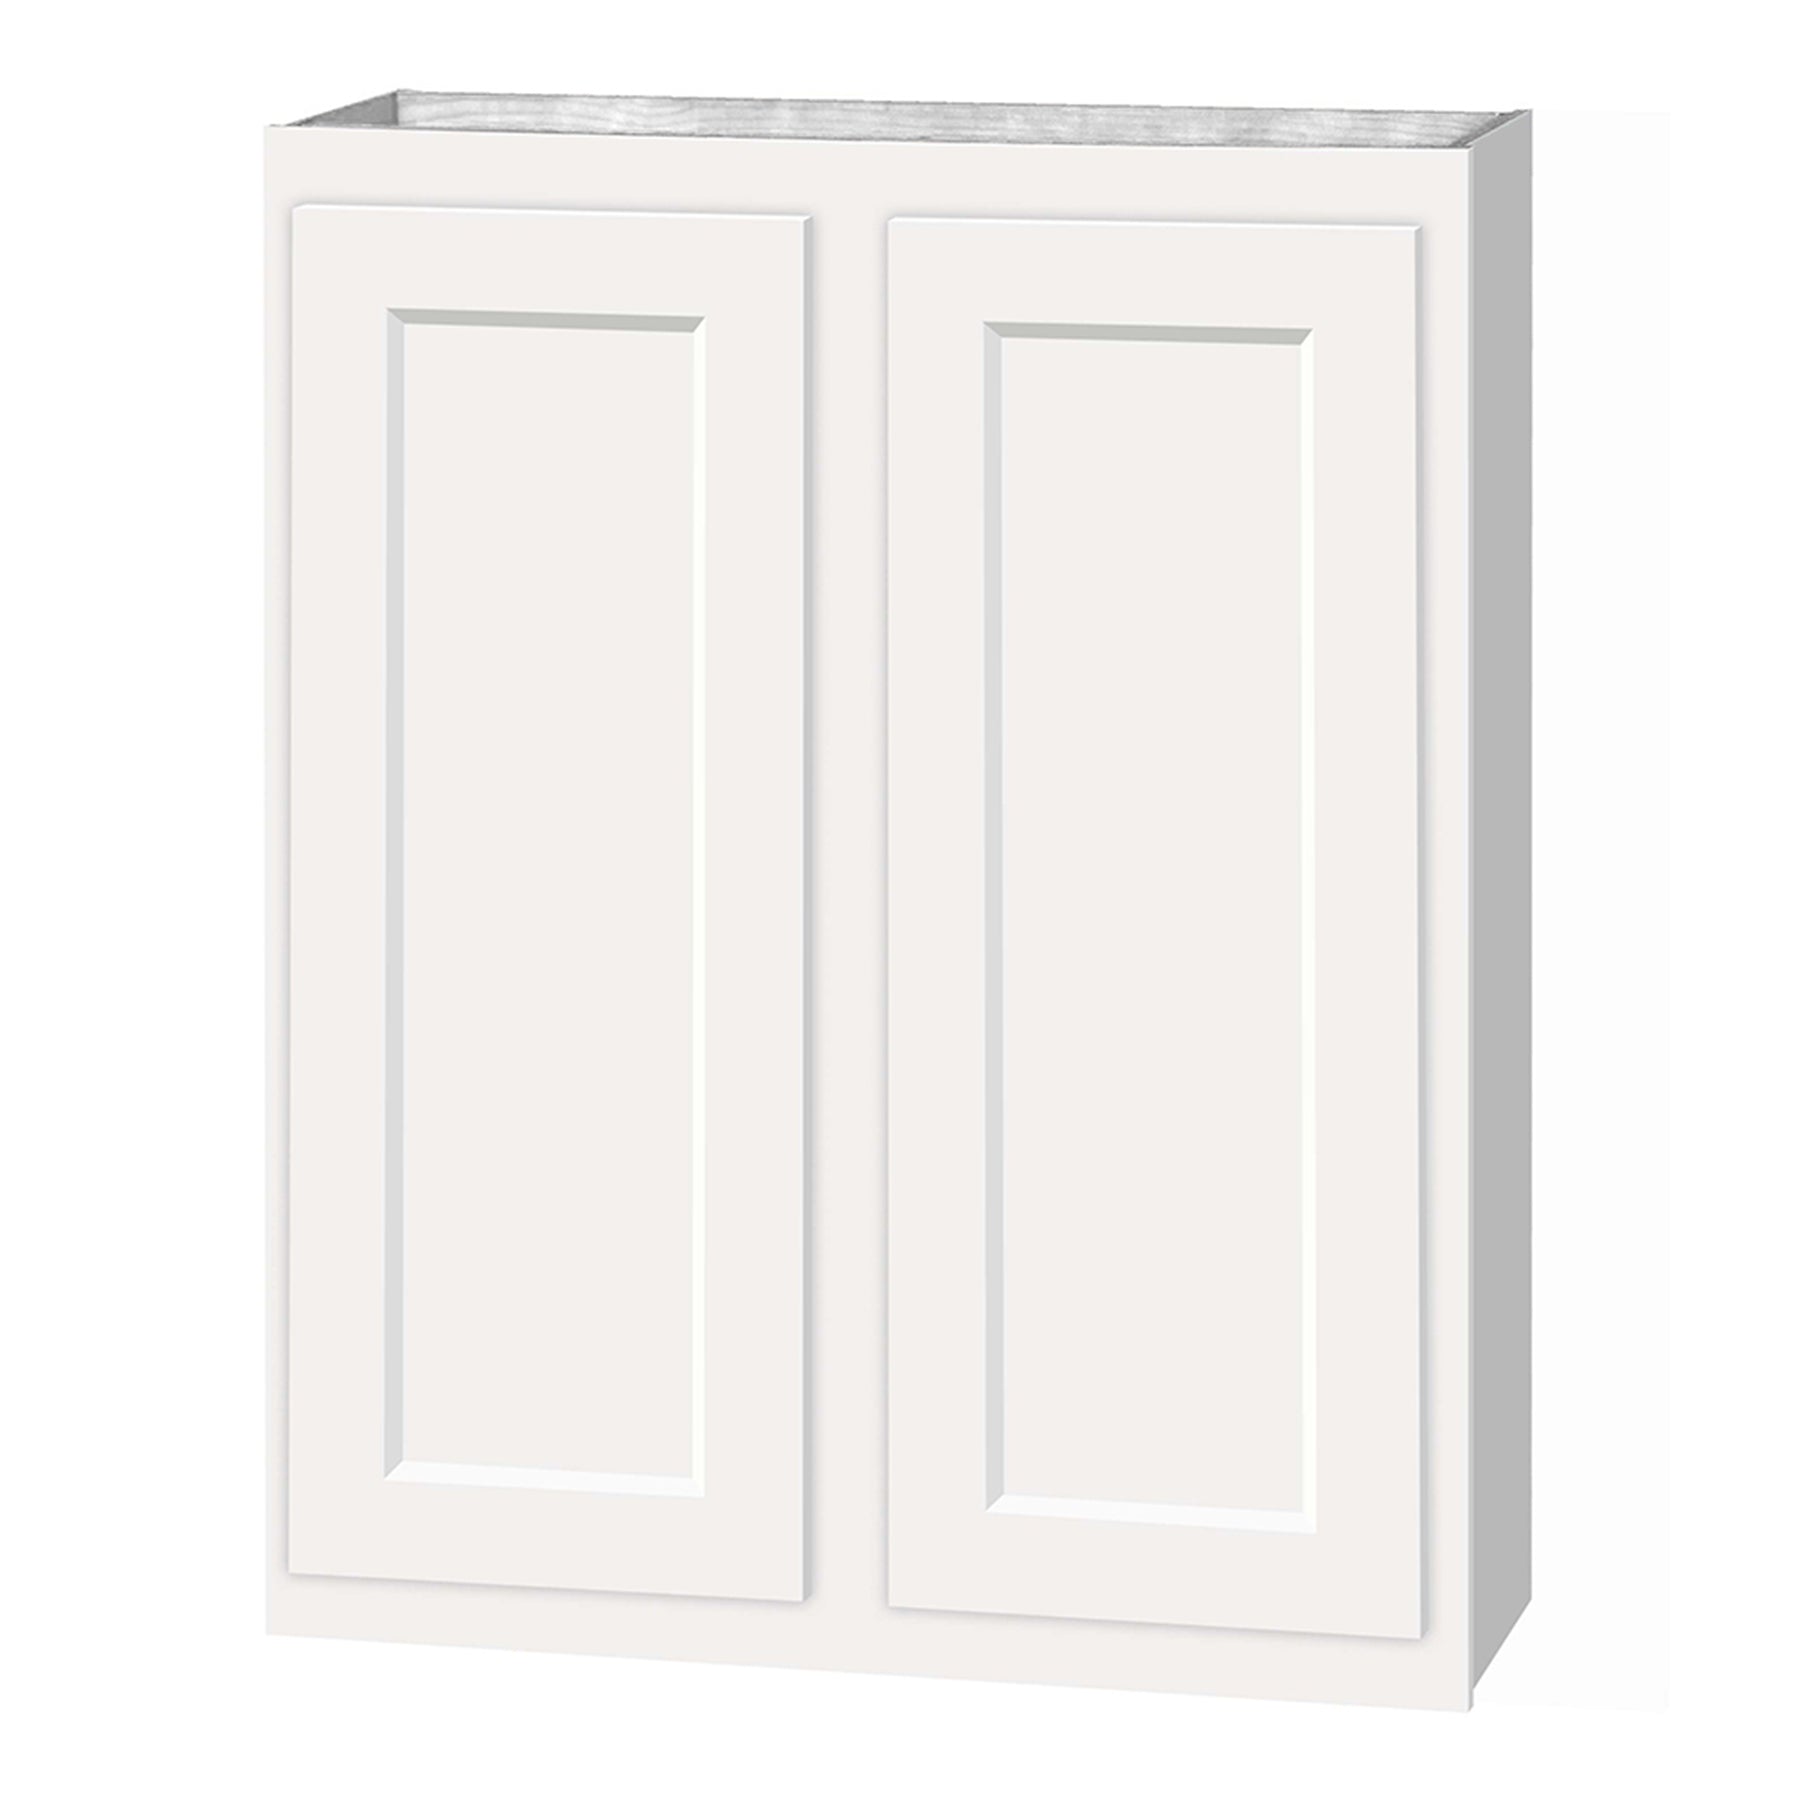 30 inch Wall Cabinets - Dwhite Shaker - 27 Inch W x 30 Inch H x 12 Inch D